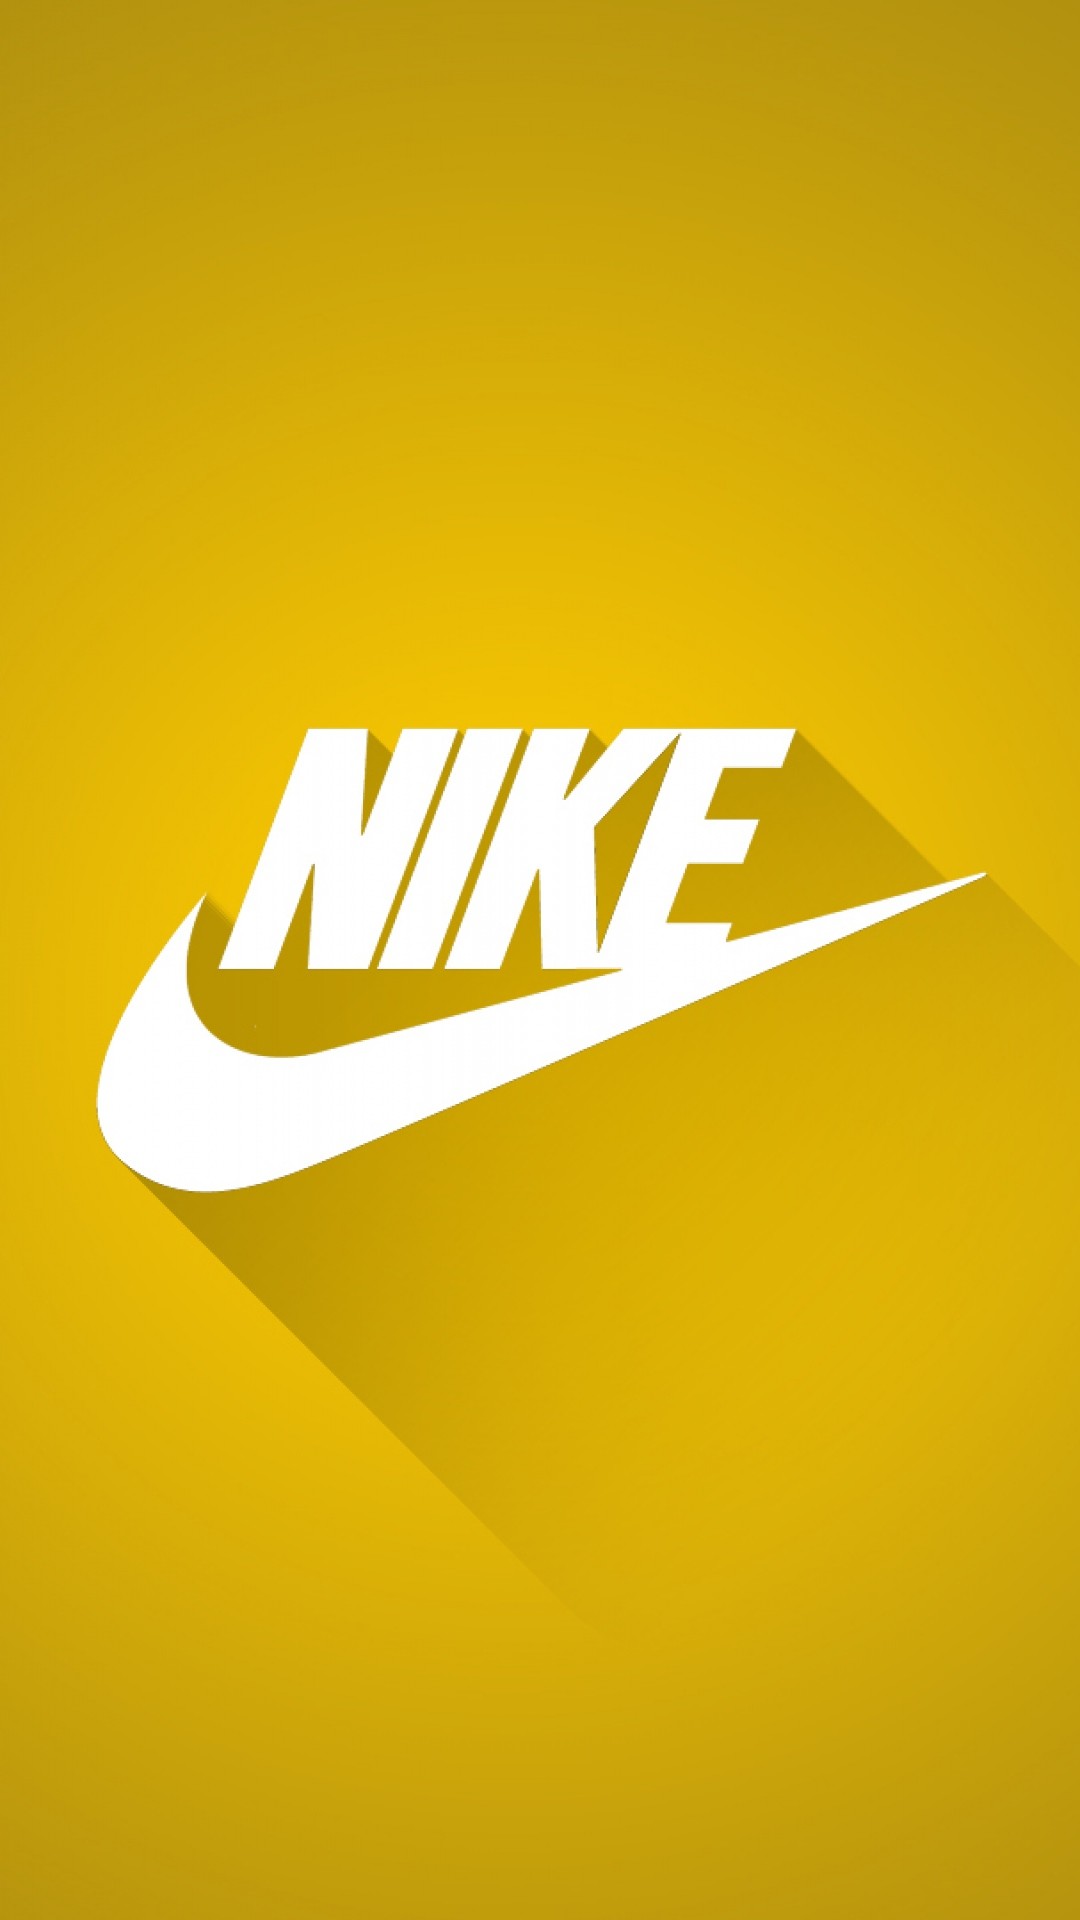 1080x1920 6. nike-wallpaper-for-iphone5-338x600